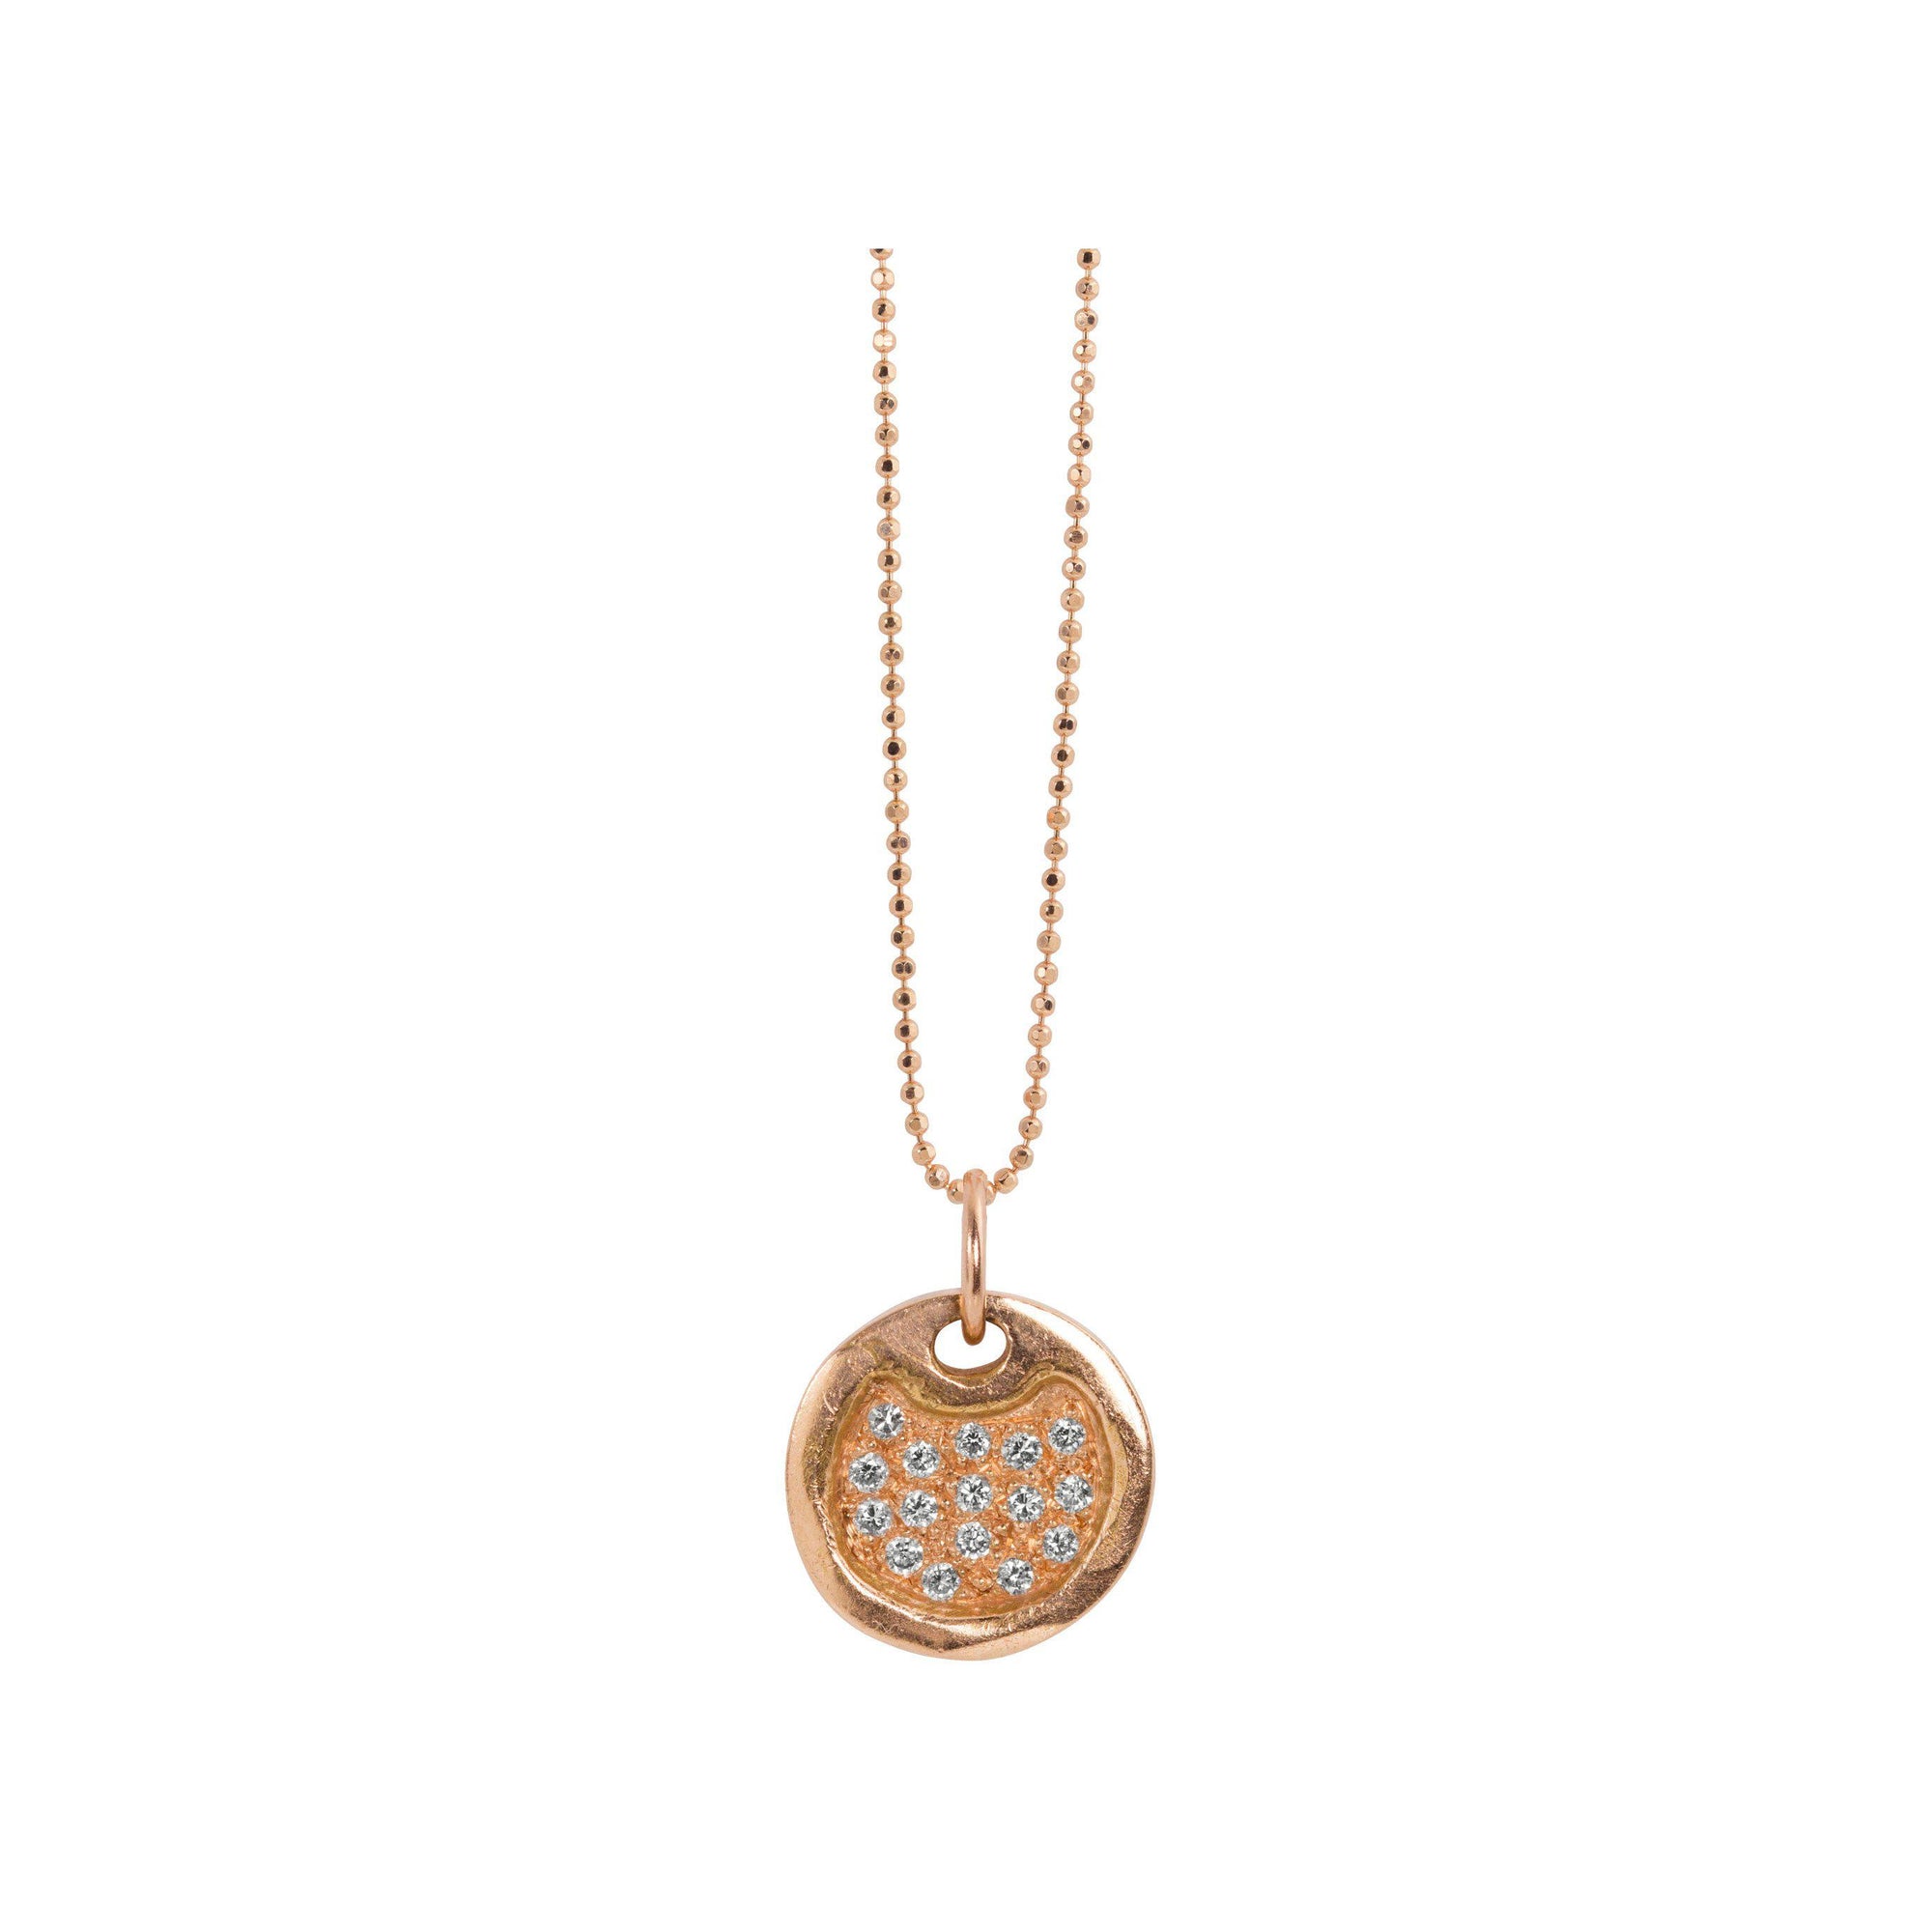 14k rose gold baby DENA round dog tag with scattered diamonds